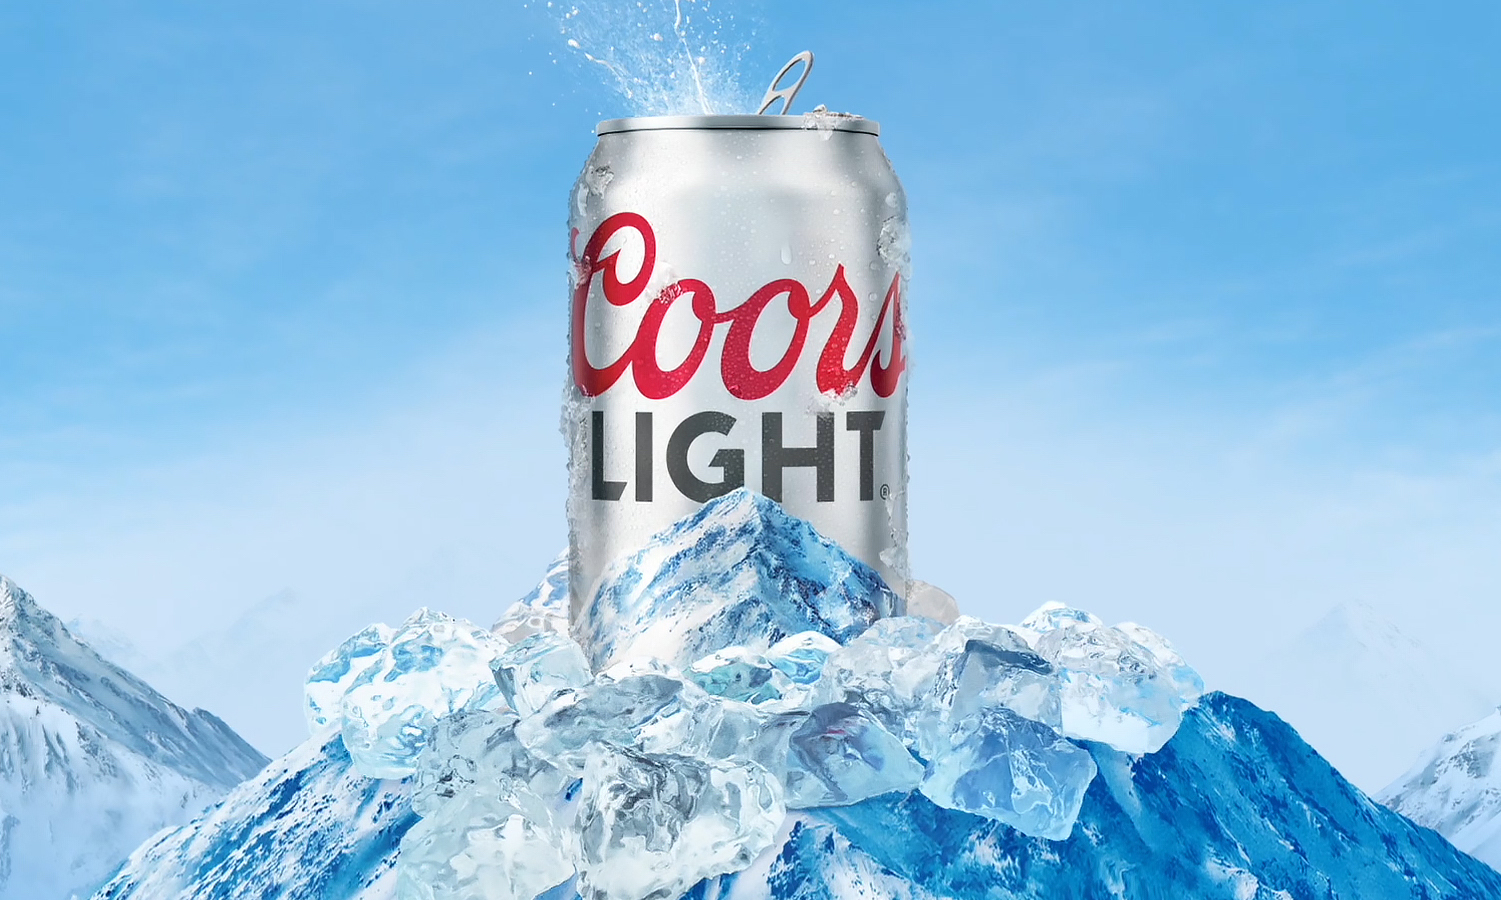 coors-light-is-giving-away-500-000-beers-to-provide-the-people-of